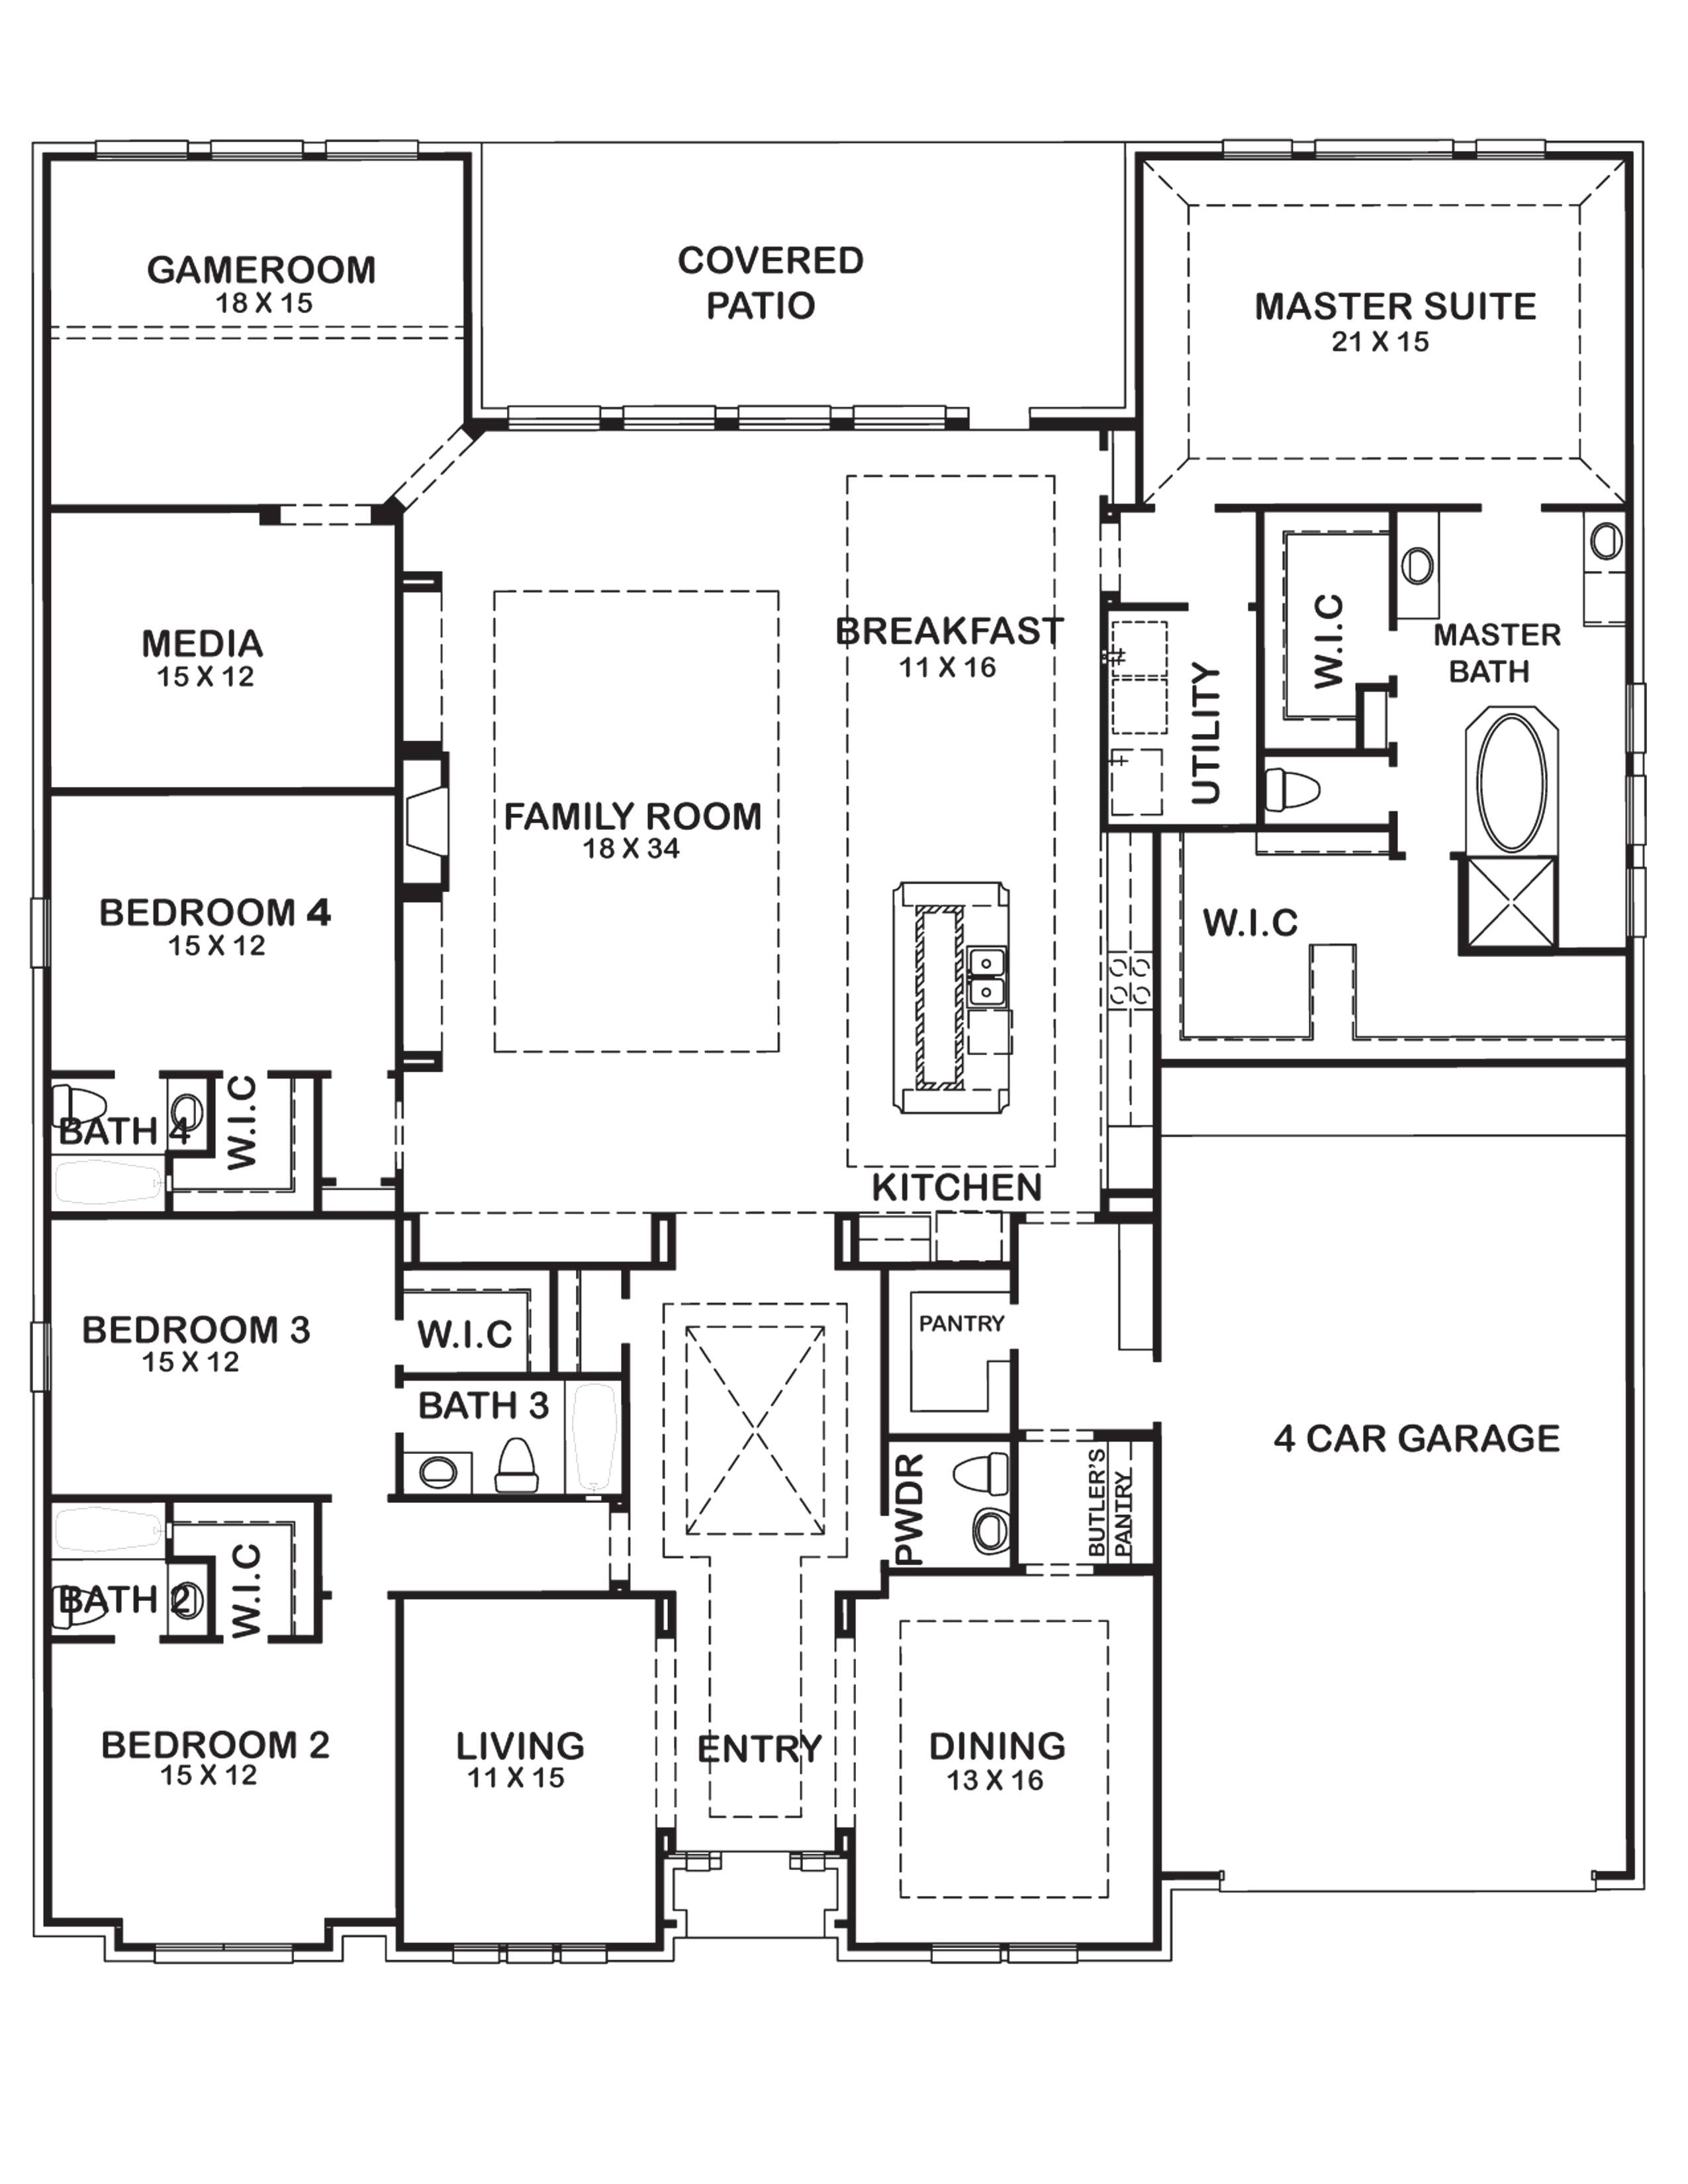 Perry Homes Floor Plans Houston Perry Home Floor Plans Fresh Perry Homes Floor Plans